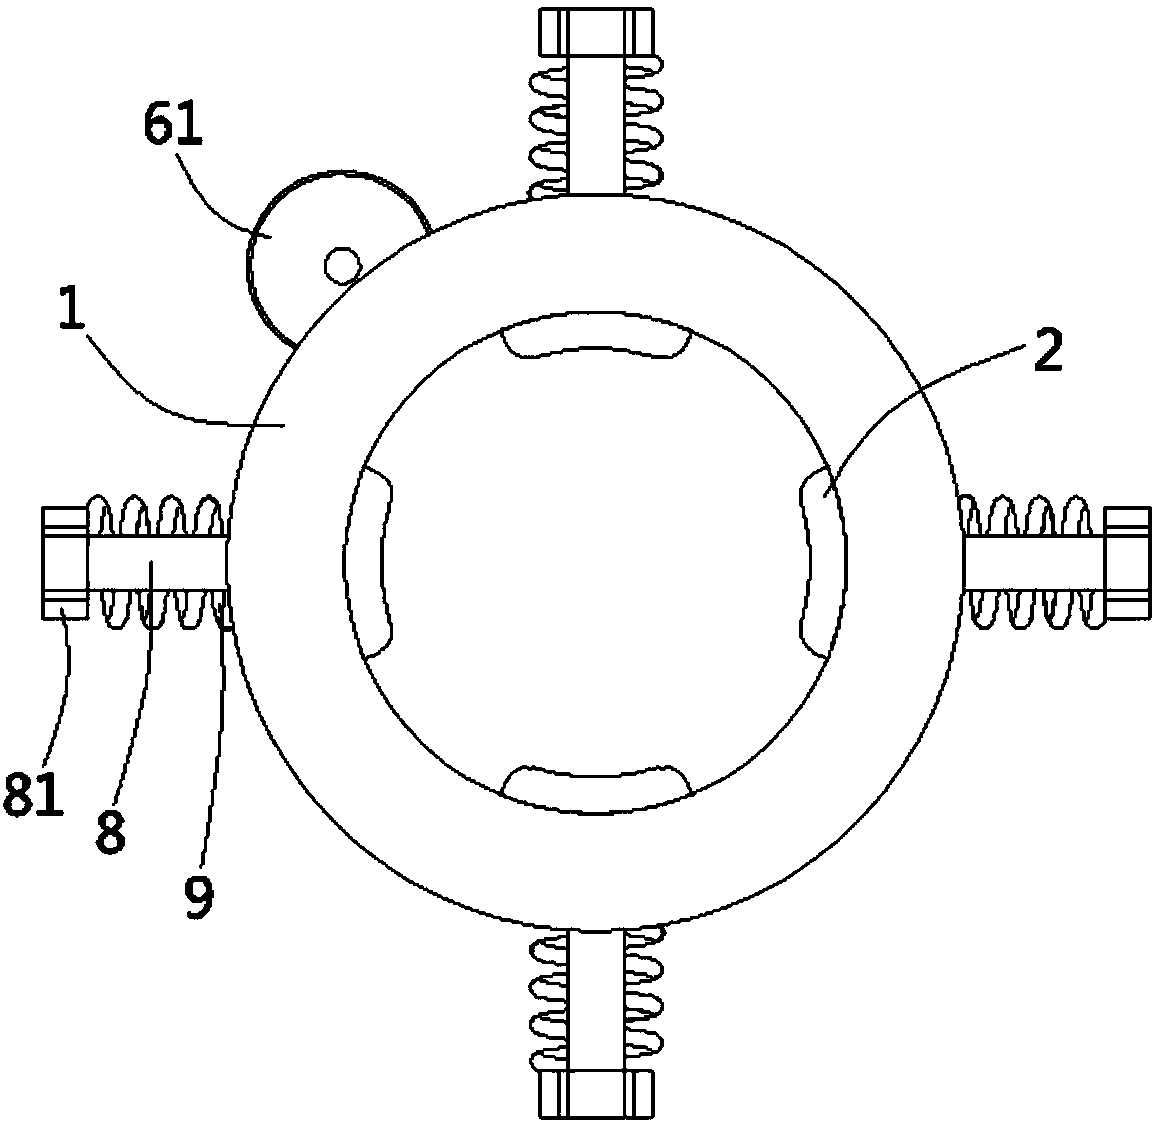 Mechanism used for clamping bearing ring